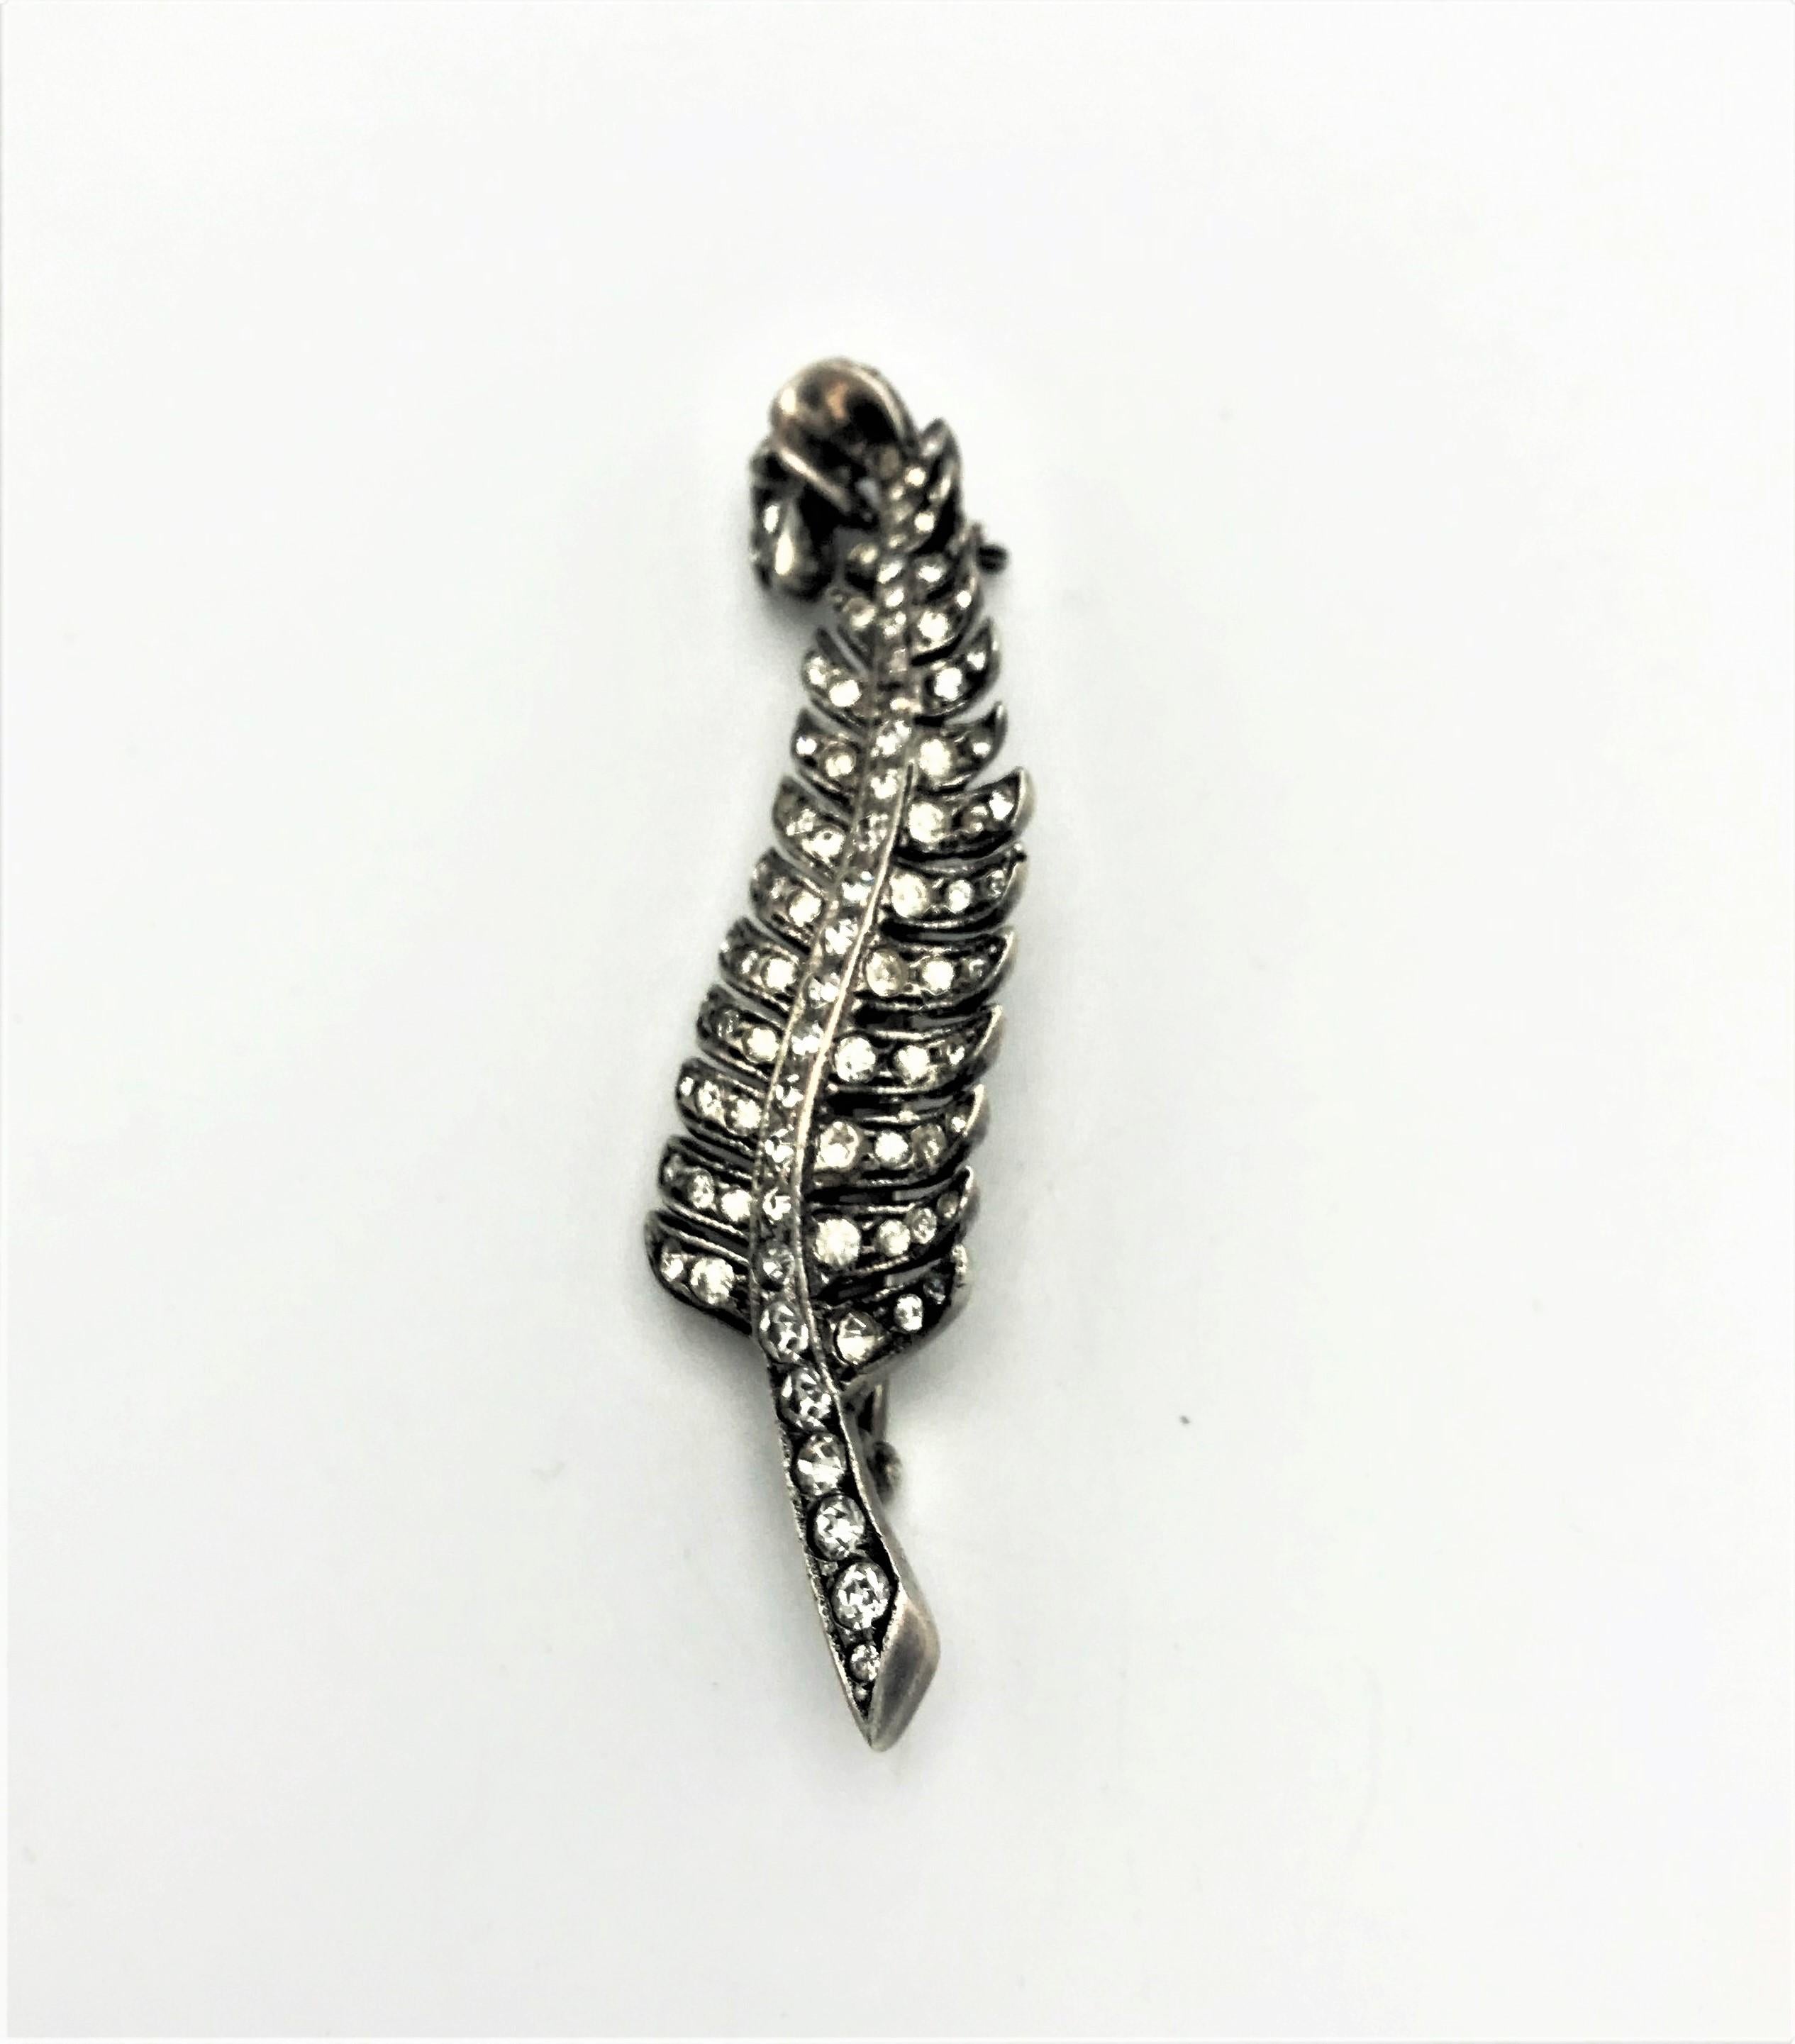 Vintage Eisenberg brooch in form of a feather, Sterling Silver, 1940 USA For Sale 1